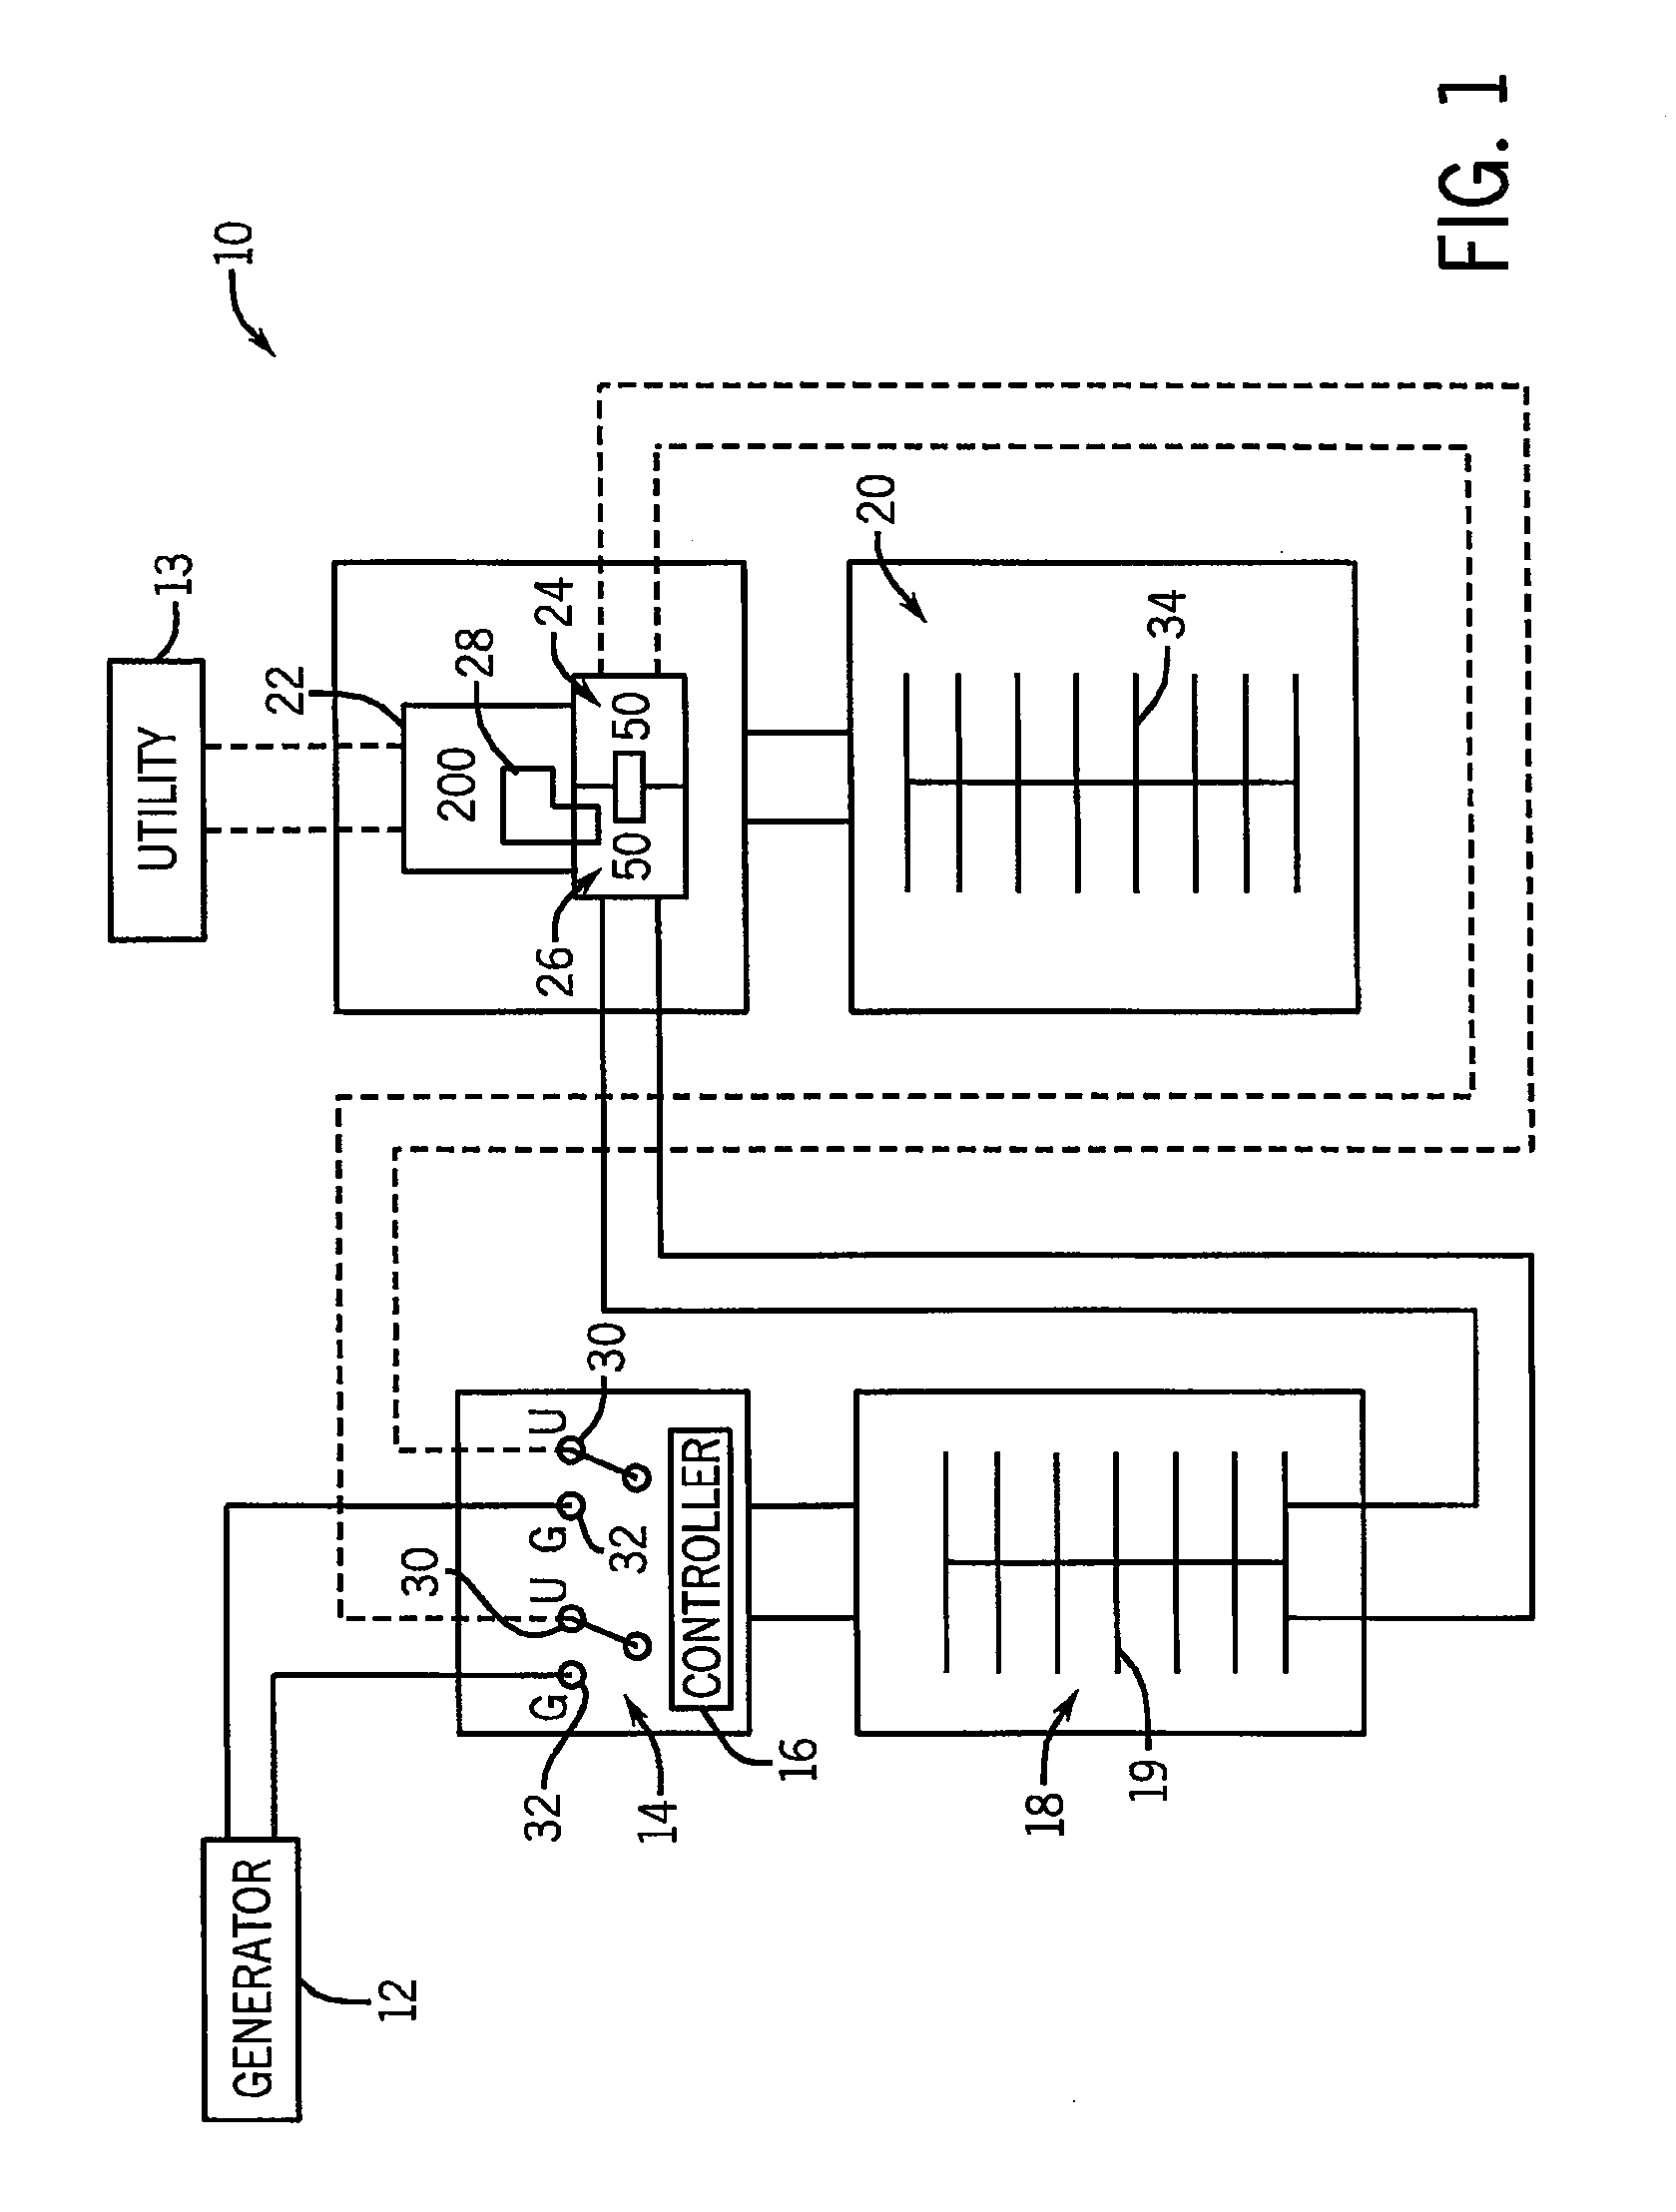 Apparatus And Method For Powering Load Center Circuits With An Auxiliary Power Source